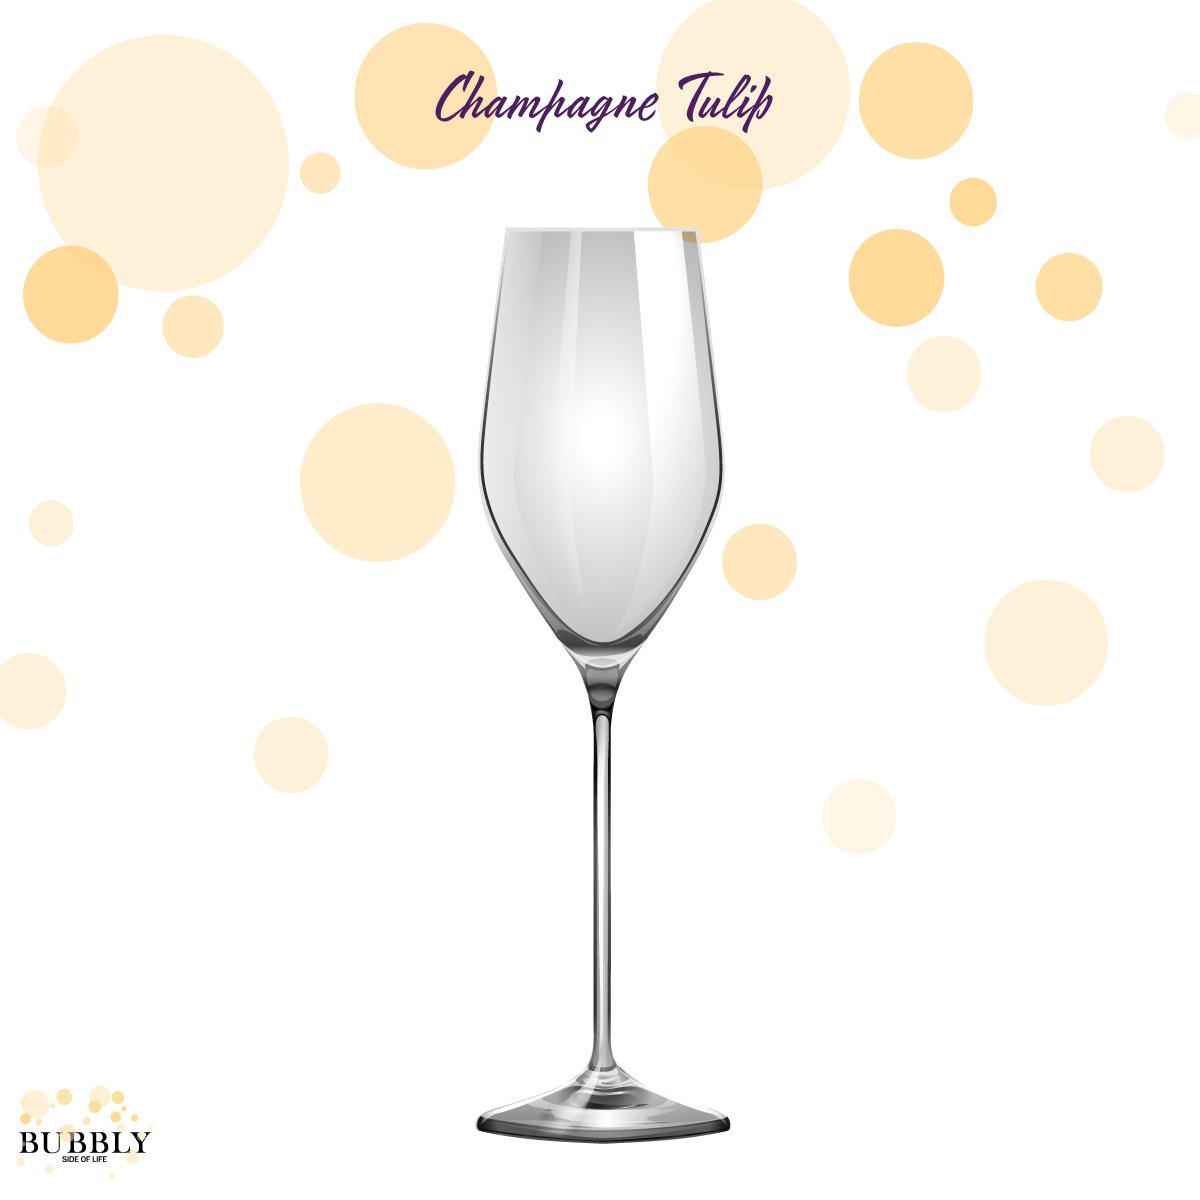 Champagne Tulips - the best champagne glass for an avid bubbly lover.